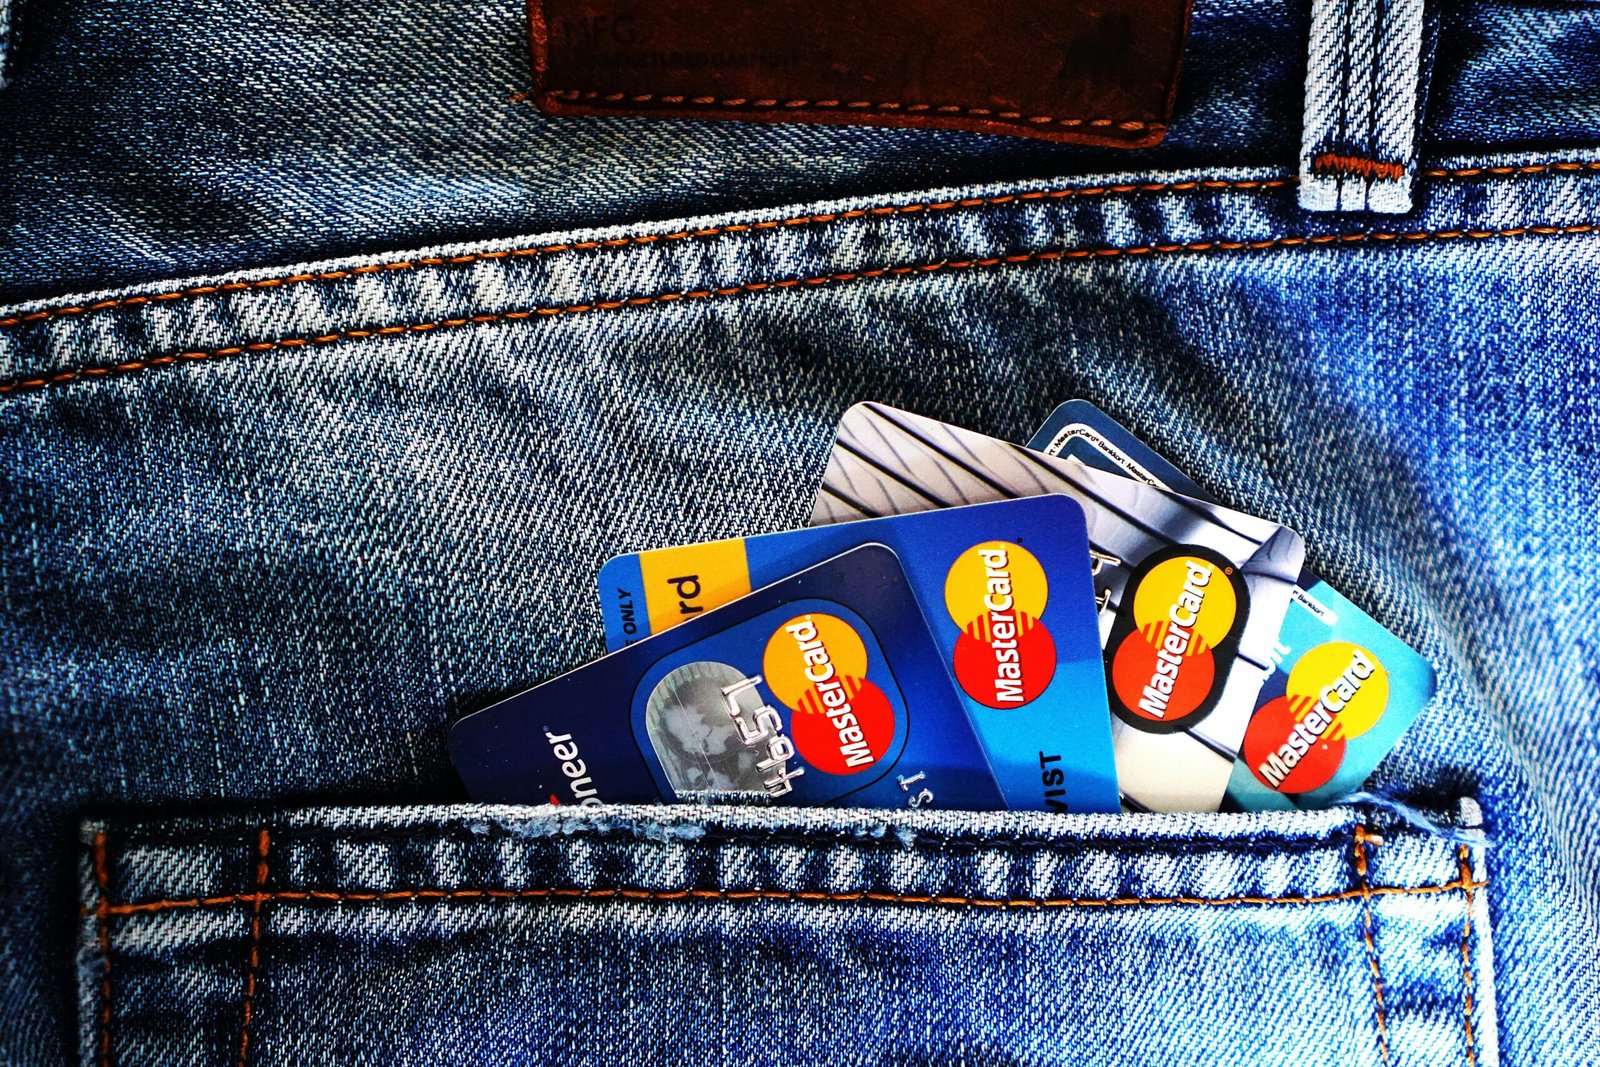 Business Line of Credit vs Credit Card: What Should You Get for Your Business?